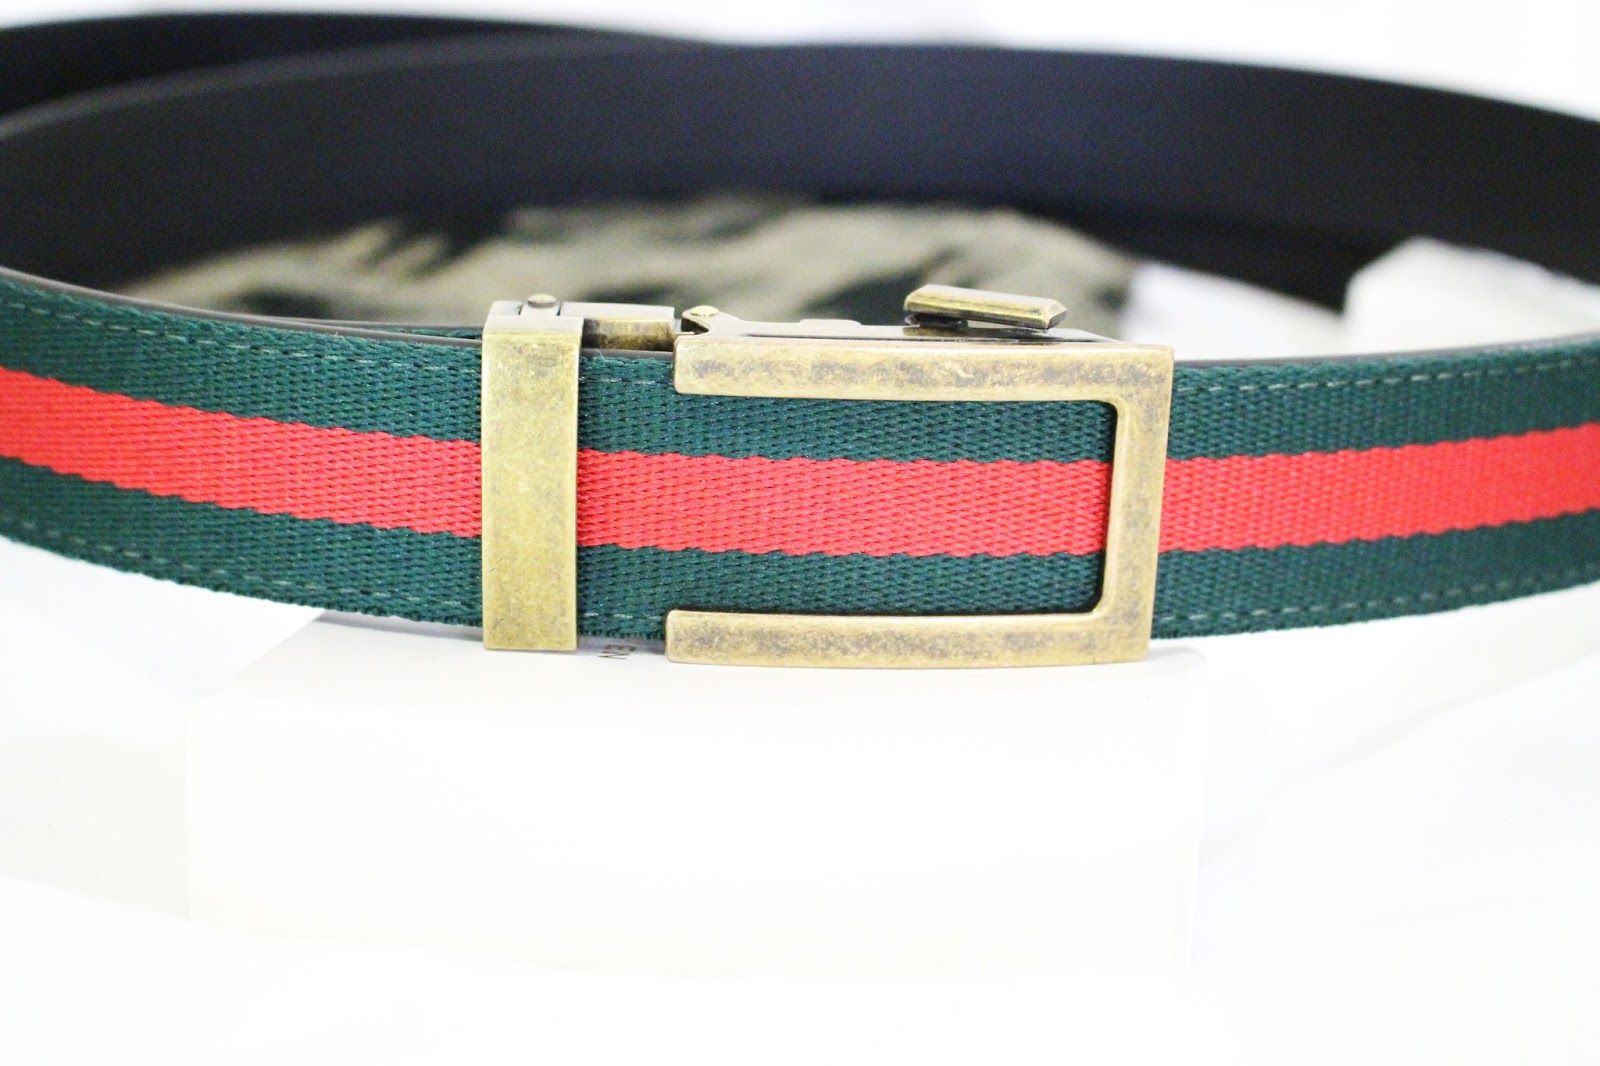 The Best Belts You Can Get Your Man - Anson Belt Review - fantail flo